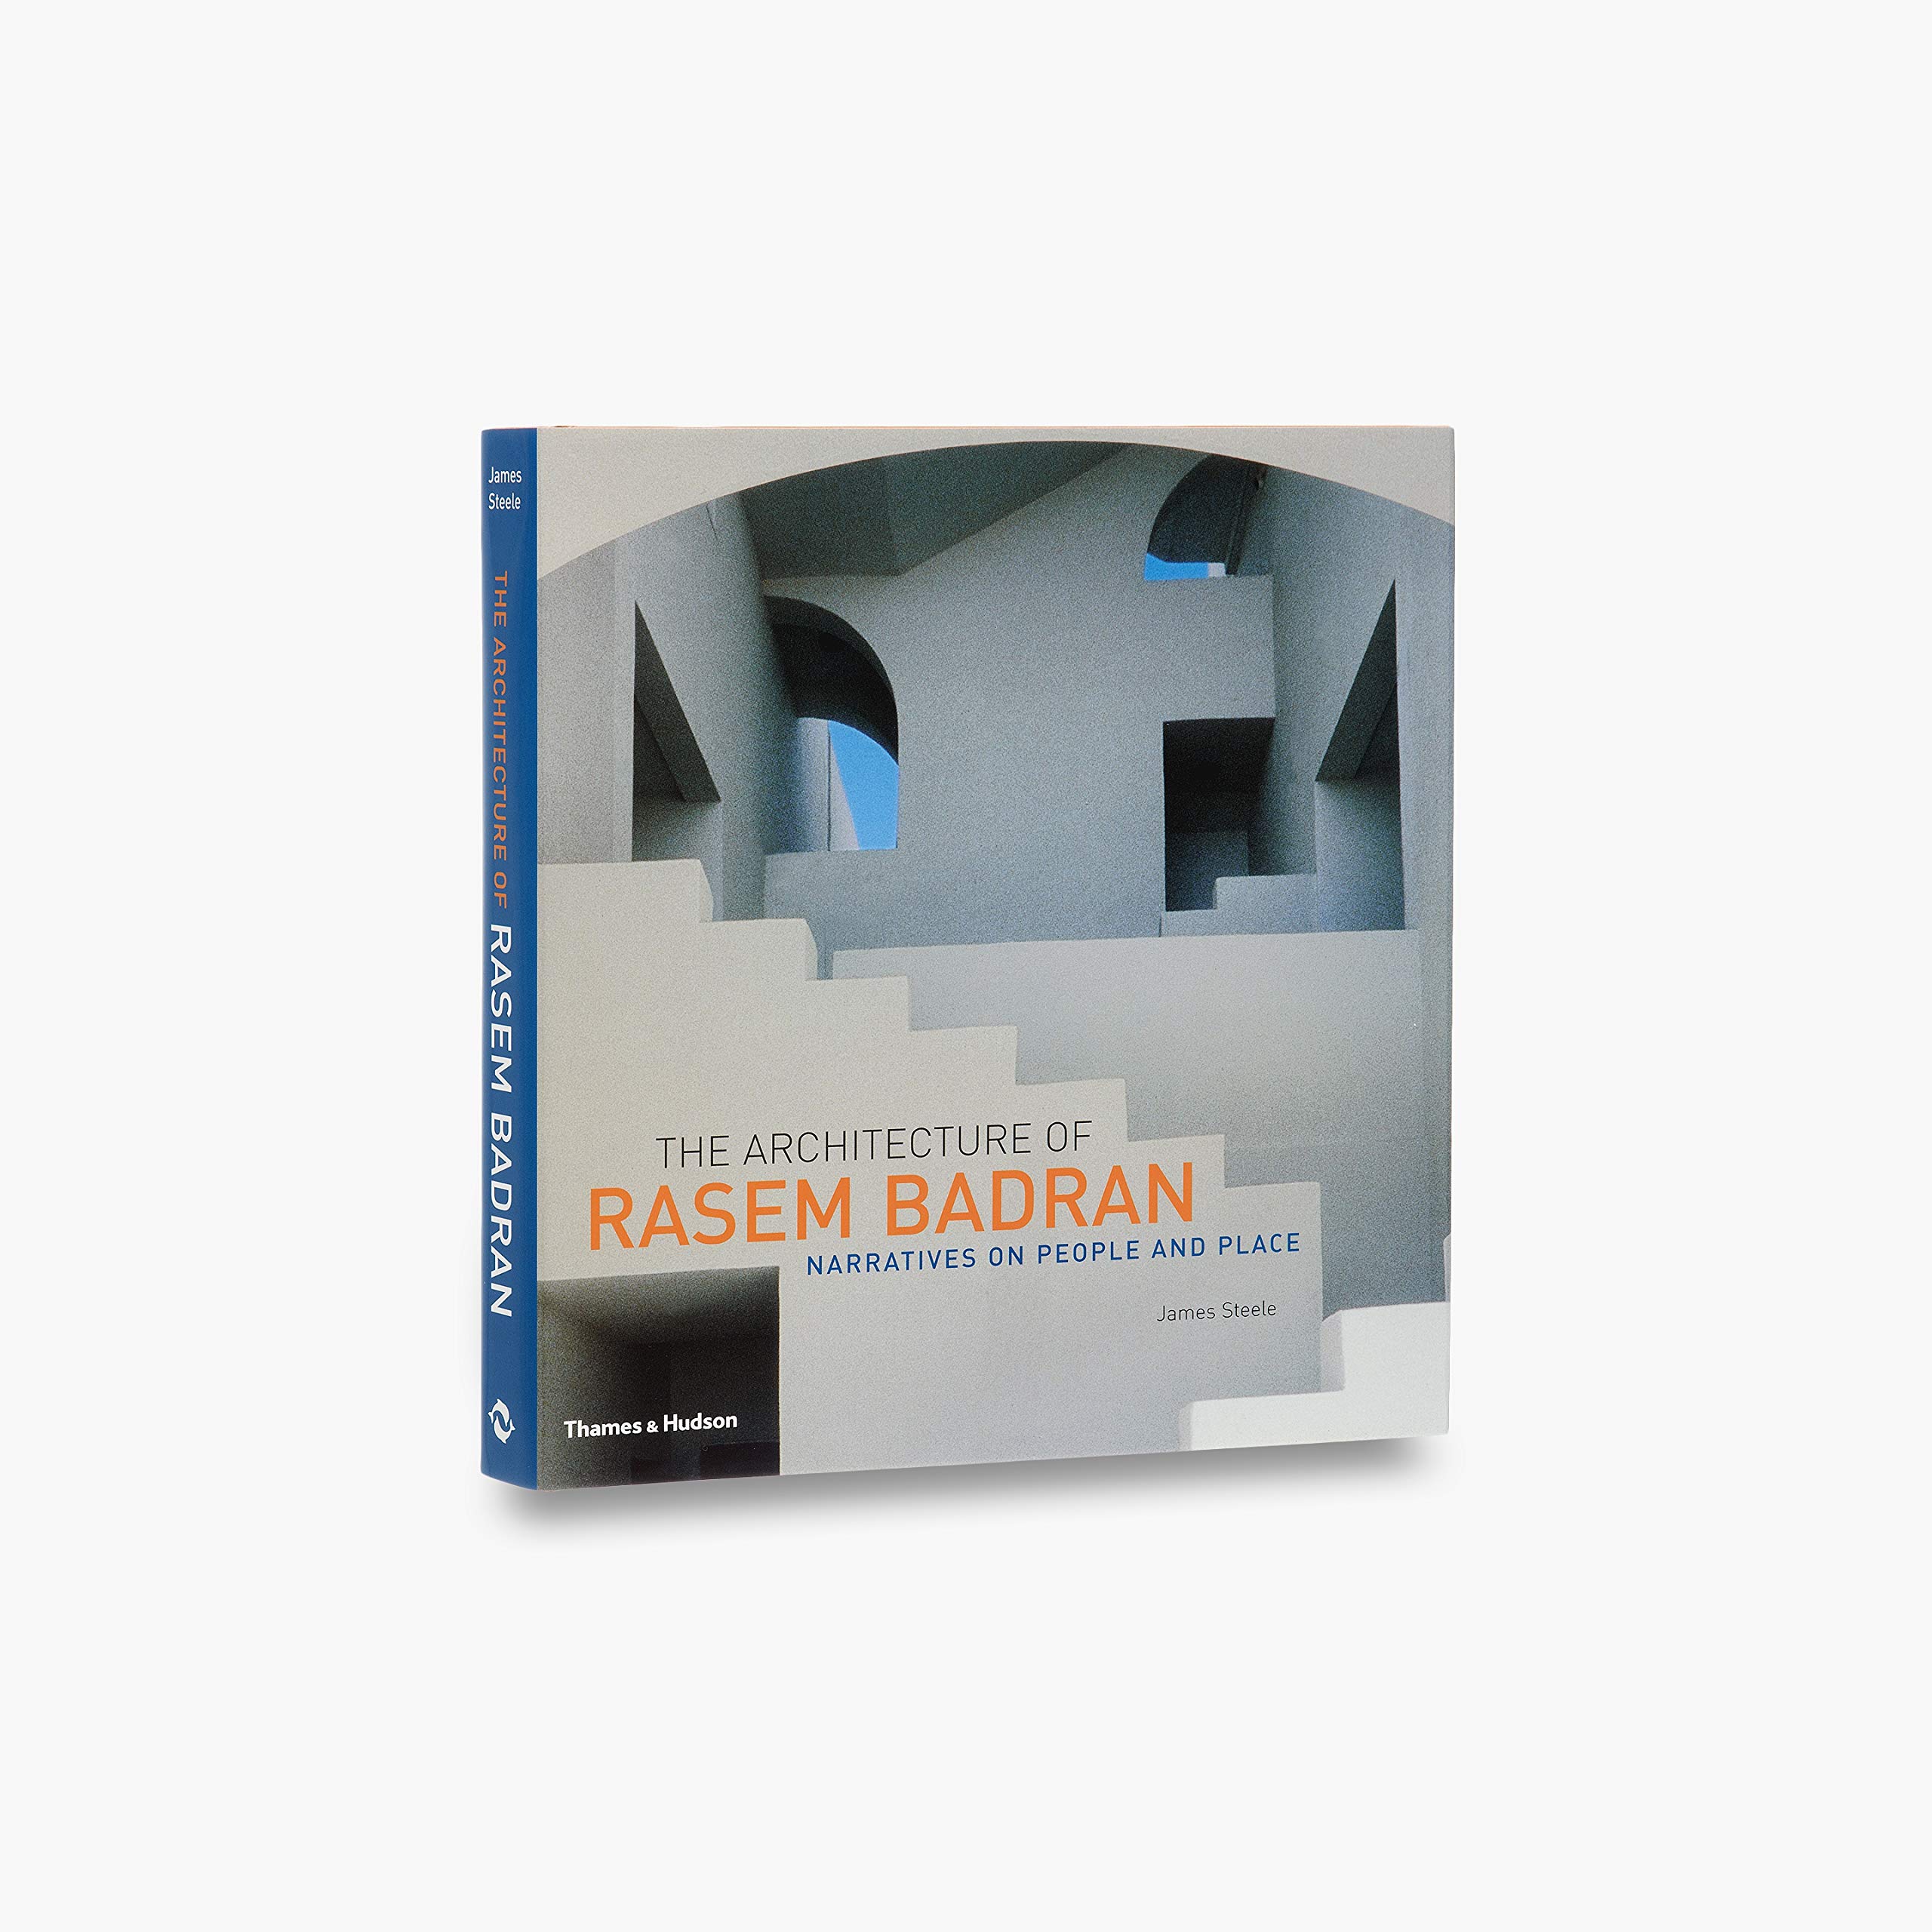 The Architecture of Rasem Badran - Narratives on People and Place